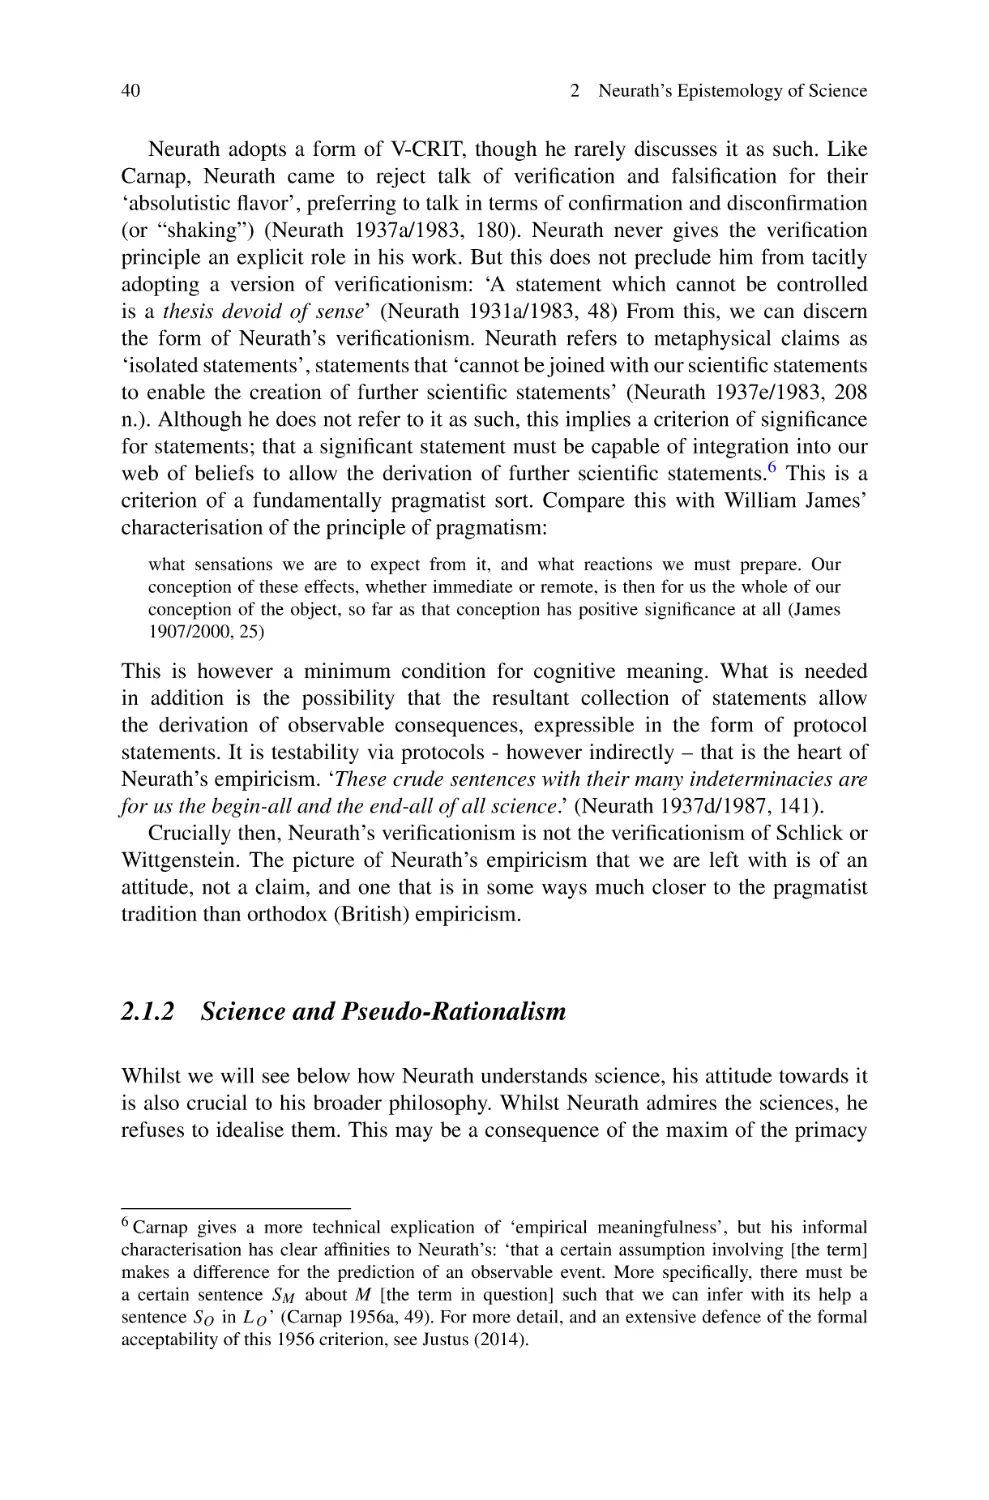 2.1.2 Science and Pseudo-Rationalism